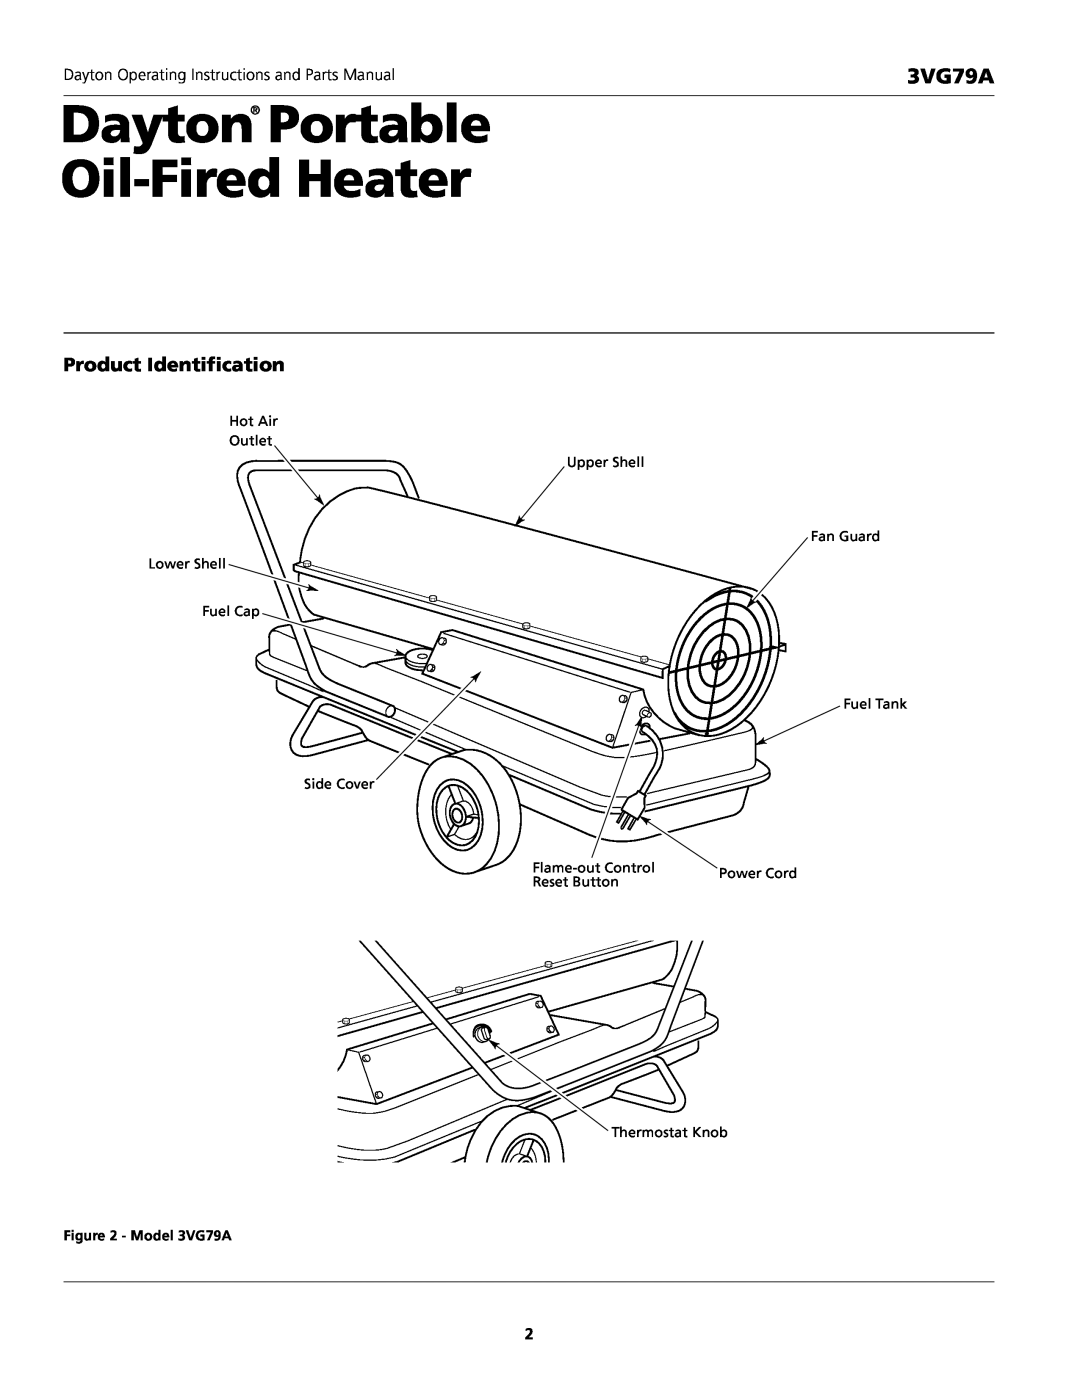 Dayton specifications Dayton Portable Oil-FiredHeater, Product Identification, Model 3VG79A 